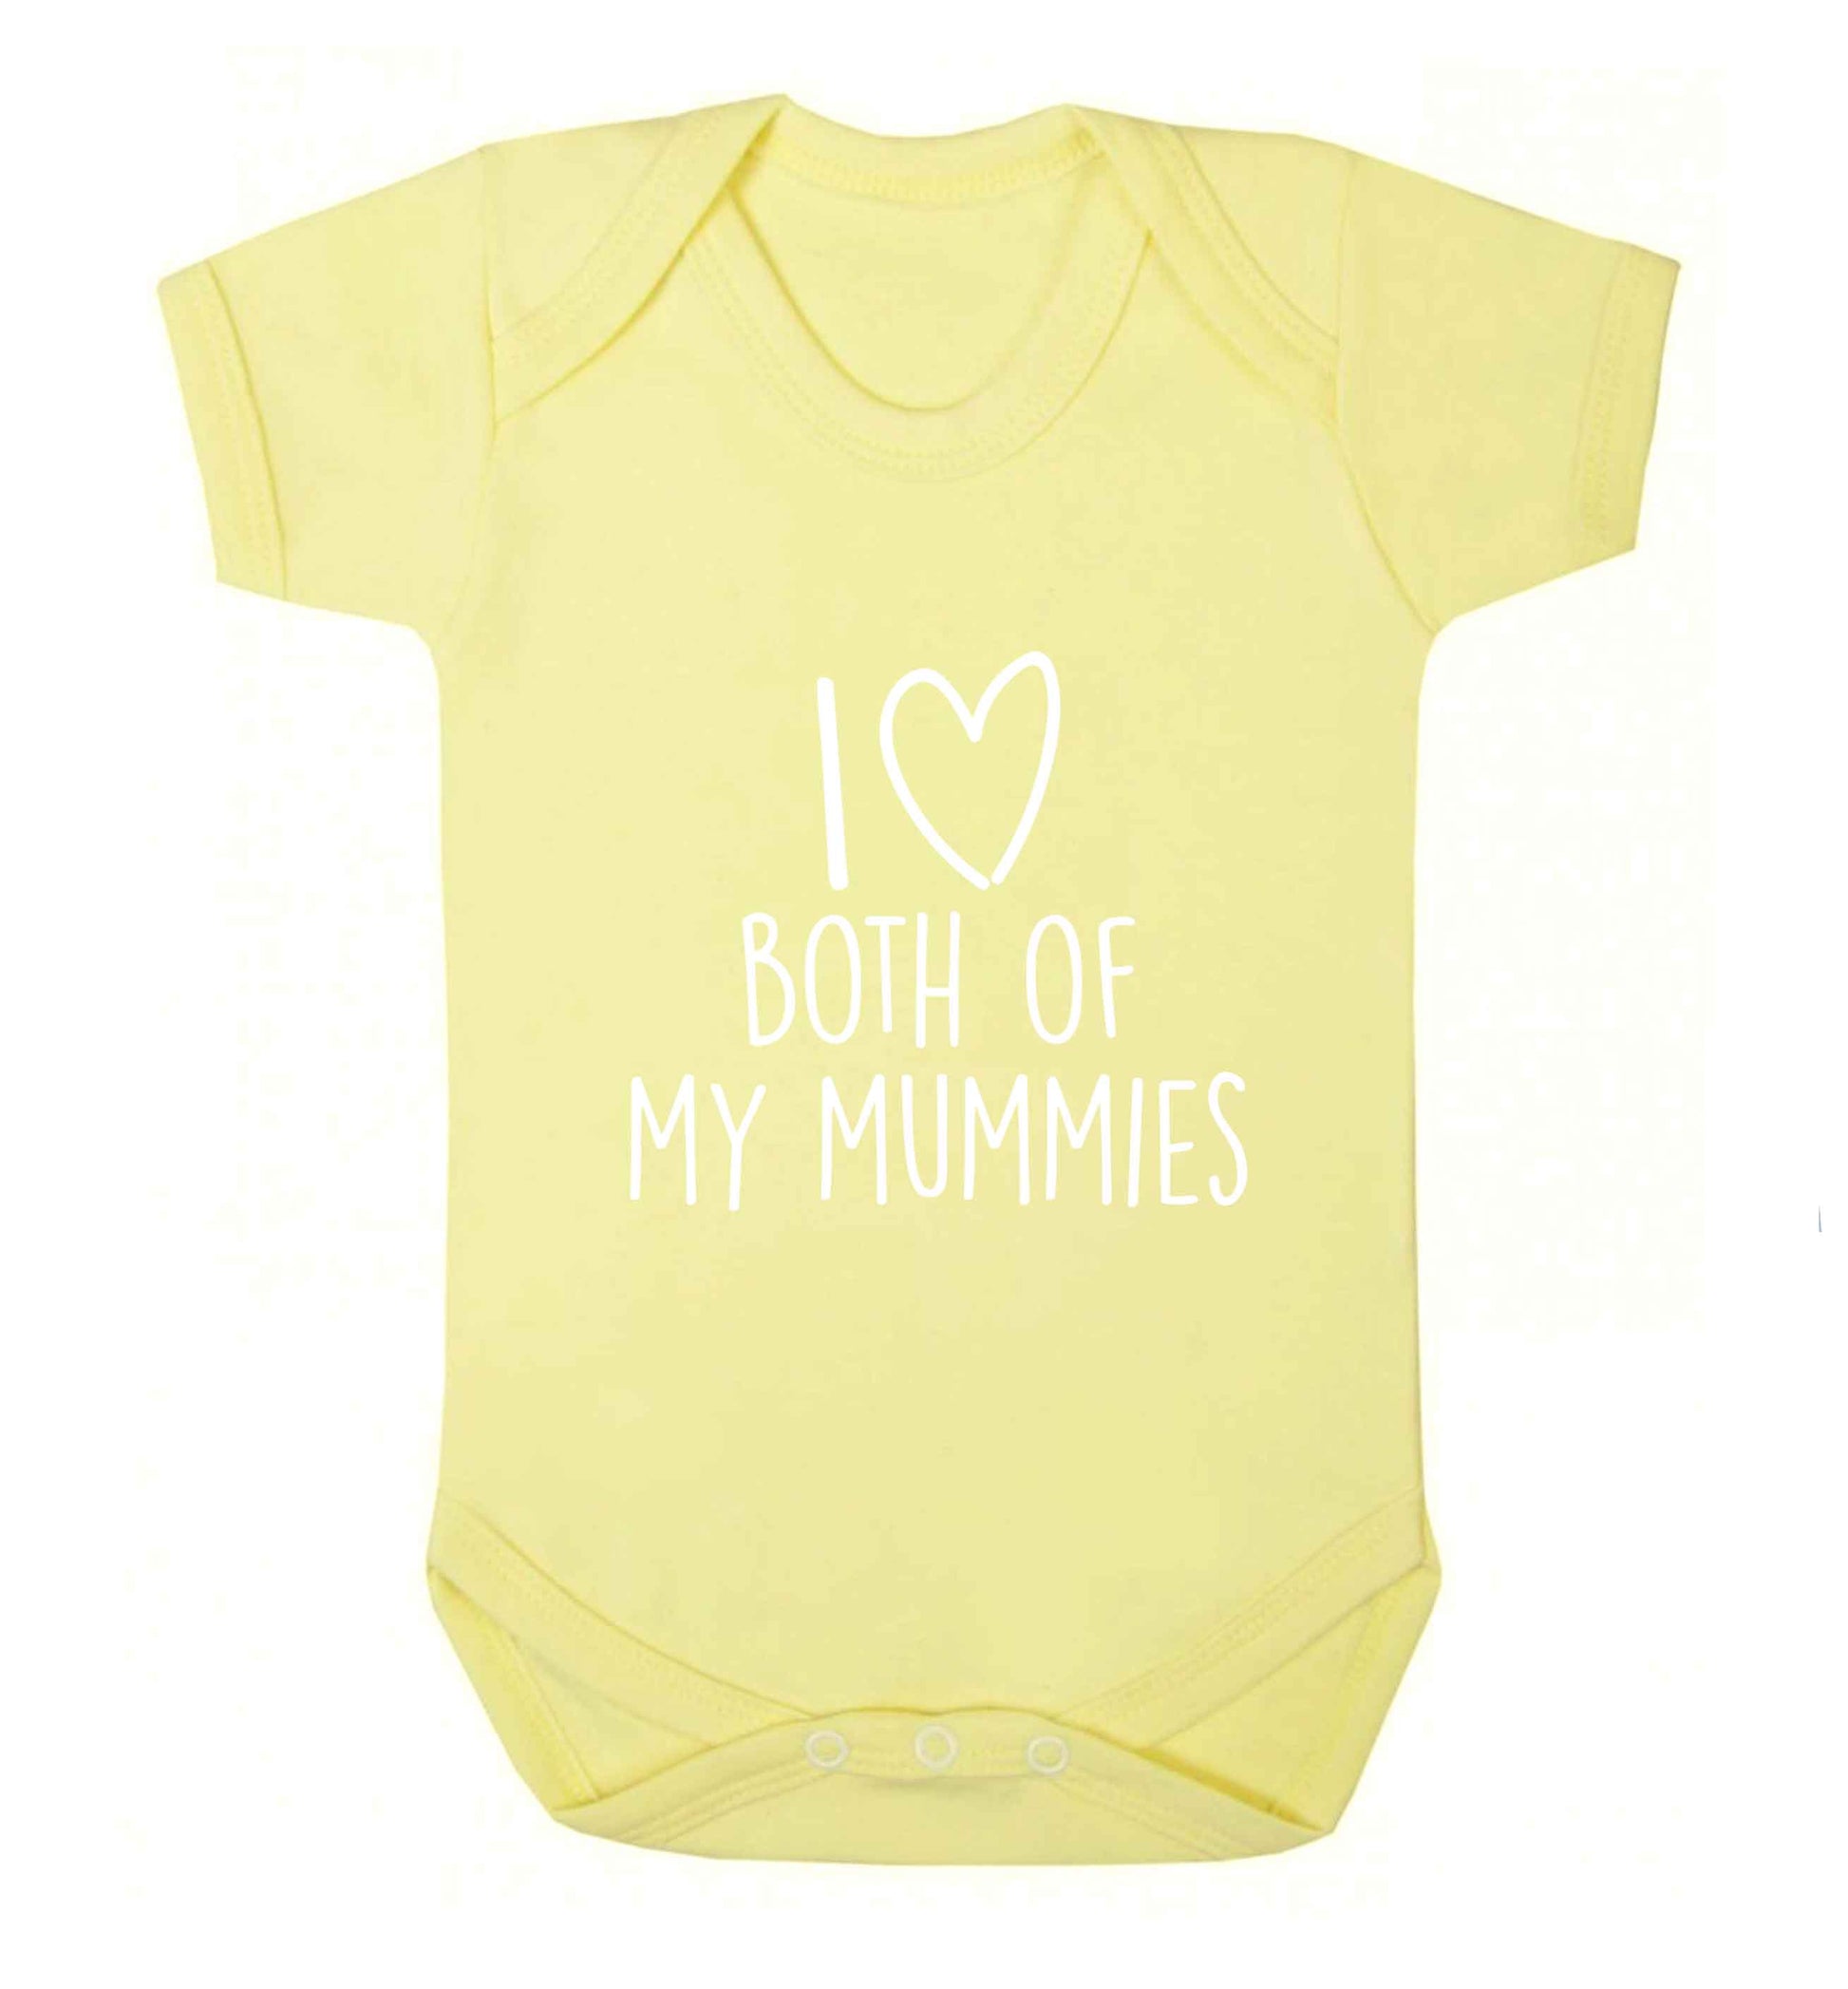 I love both of my mummies baby vest pale yellow 18-24 months